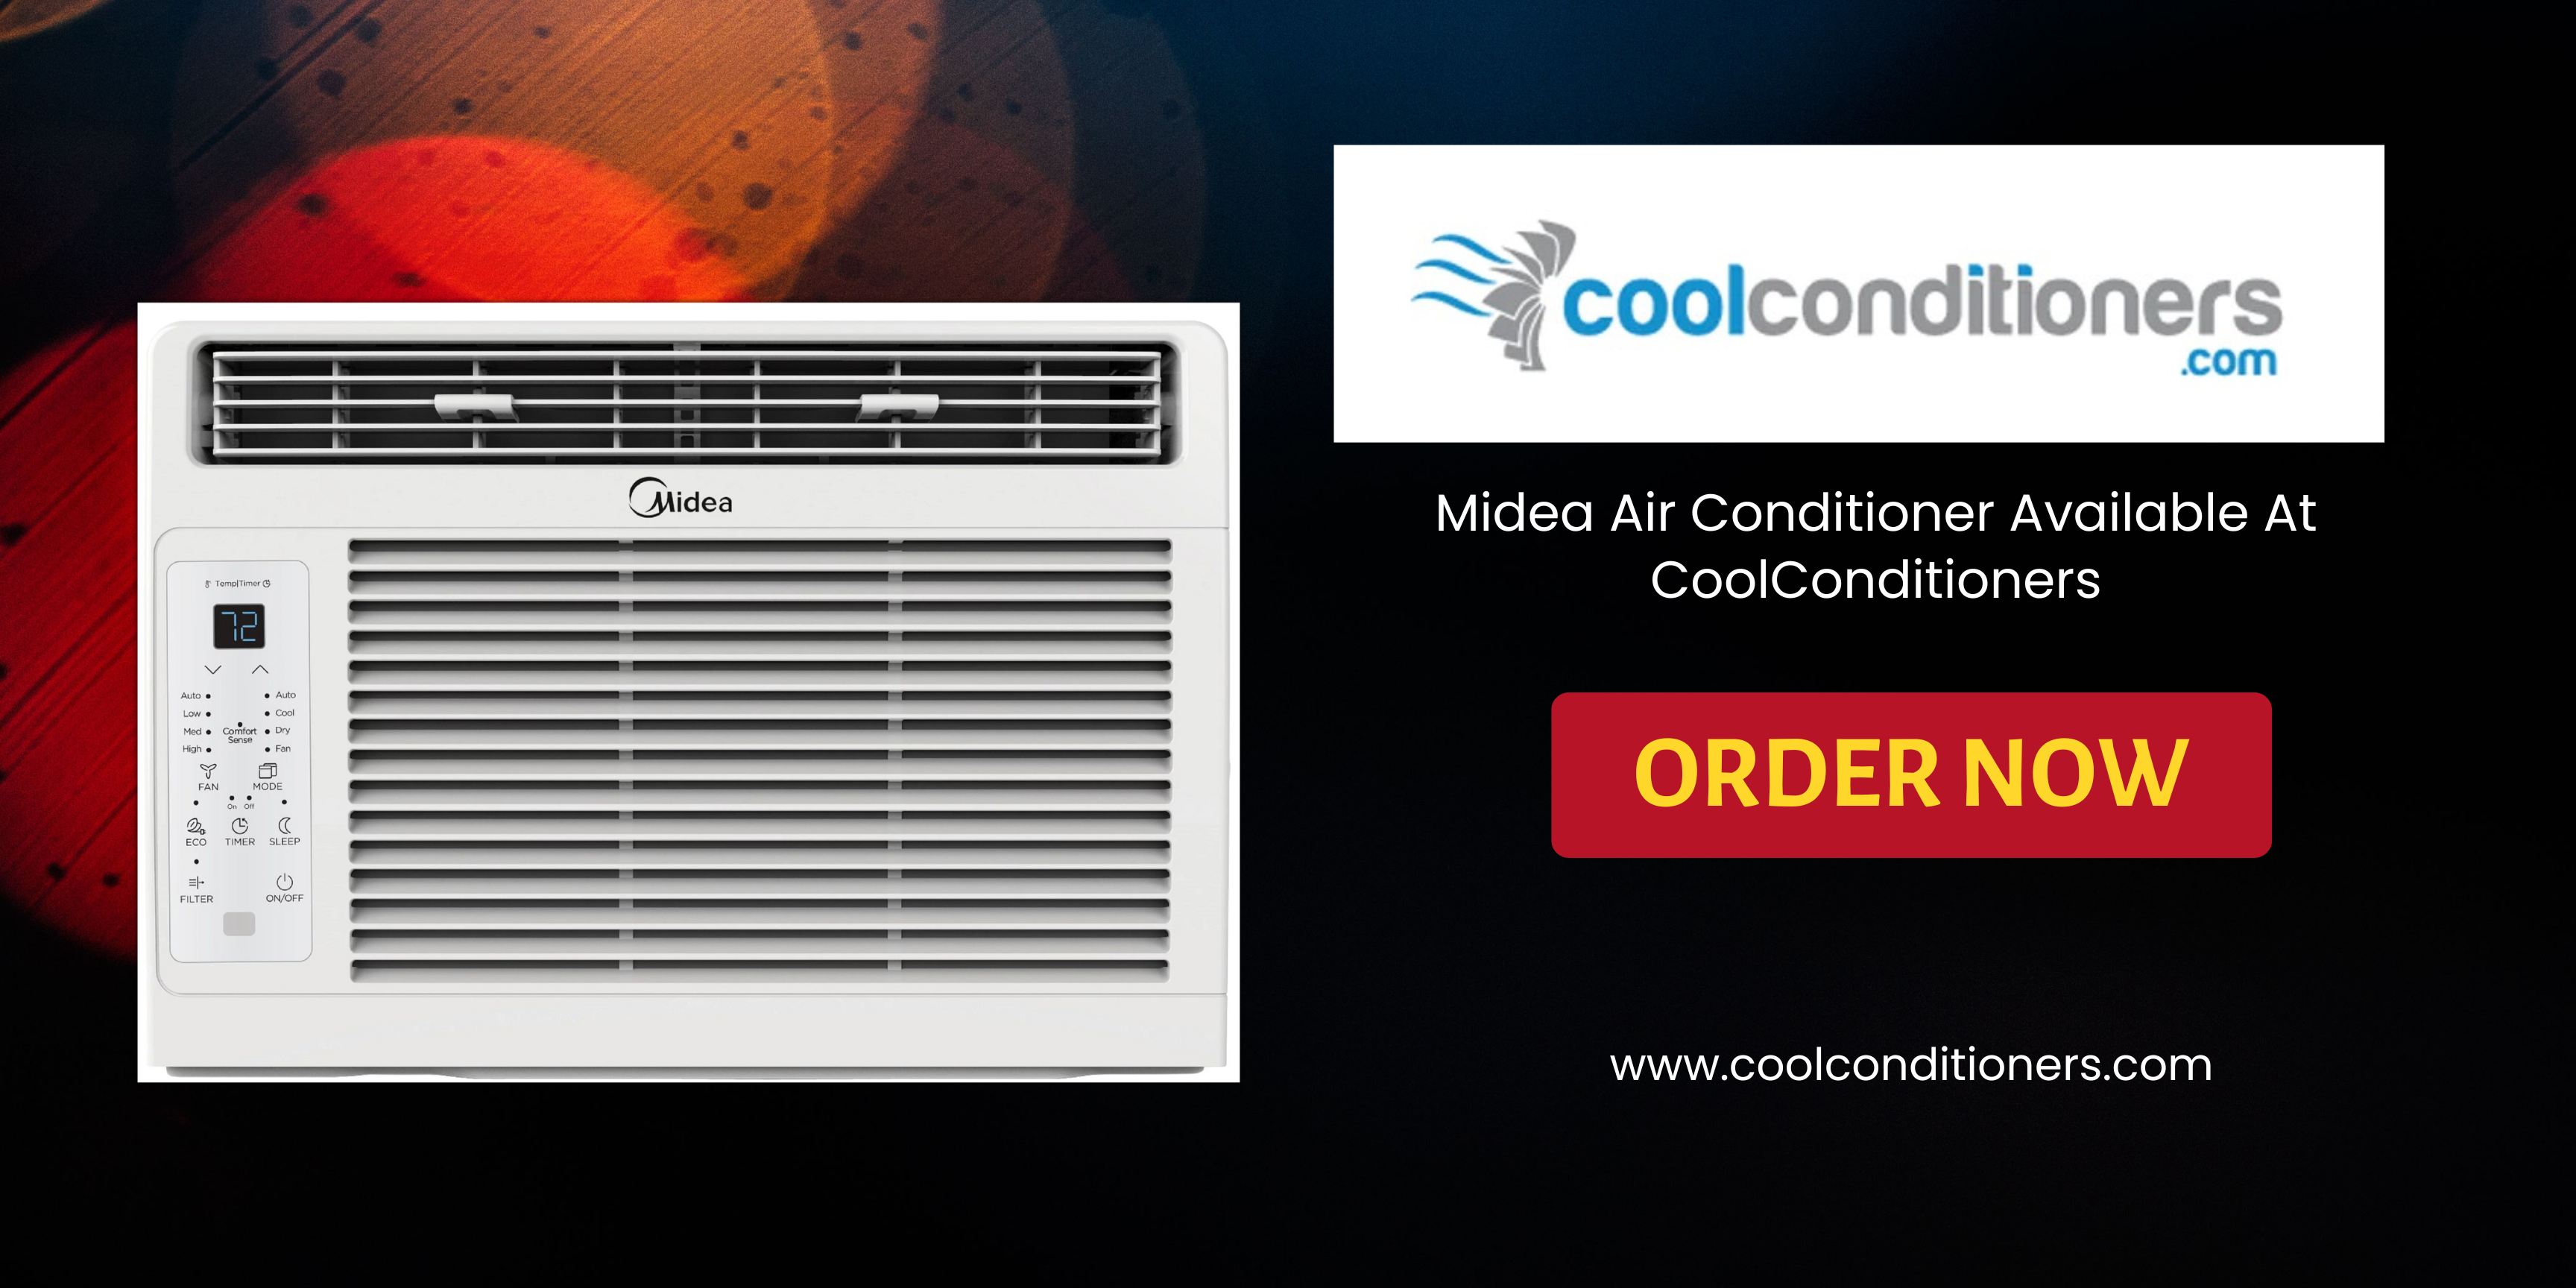 Midea Air Conditioner Available On Online Retail Store CoolConditioners